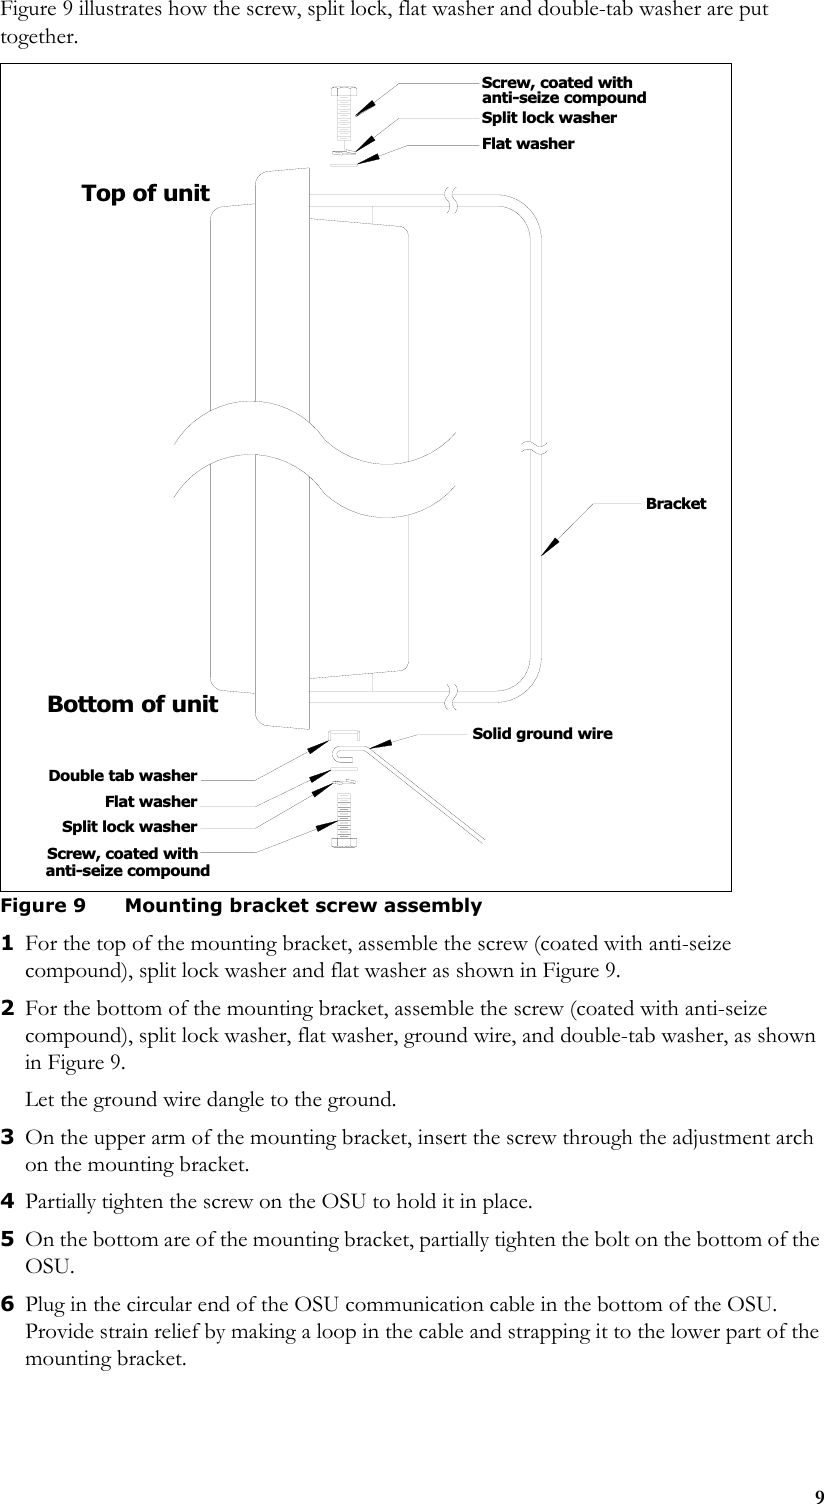 9Figure 9 illustrates how the screw, split lock, flat washer and double-tab washer are put together.1For the top of the mounting bracket, assemble the screw (coated with anti-seize compound), split lock washer and flat washer as shown in Figure 9.2For the bottom of the mounting bracket, assemble the screw (coated with anti-seize compound), split lock washer, flat washer, ground wire, and double-tab washer, as shown in Figure 9.Let the ground wire dangle to the ground. 3On the upper arm of the mounting bracket, insert the screw through the adjustment arch on the mounting bracket. 4Partially tighten the screw on the OSU to hold it in place.5On the bottom are of the mounting bracket, partially tighten the bolt on the bottom of the OSU. 6Plug in the circular end of the OSU communication cable in the bottom of the OSU. Provide strain relief by making a loop in the cable and strapping it to the lower part of the mounting bracket. Figure 9 Mounting bracket screw assemblyScrew, coated withSplit lock washerFlat washerBracketSolid ground wireSplit lock washerFlat washerDouble tab washerScrew, coated withTop of unitBottom of unitanti-seize compoundanti-seize compound